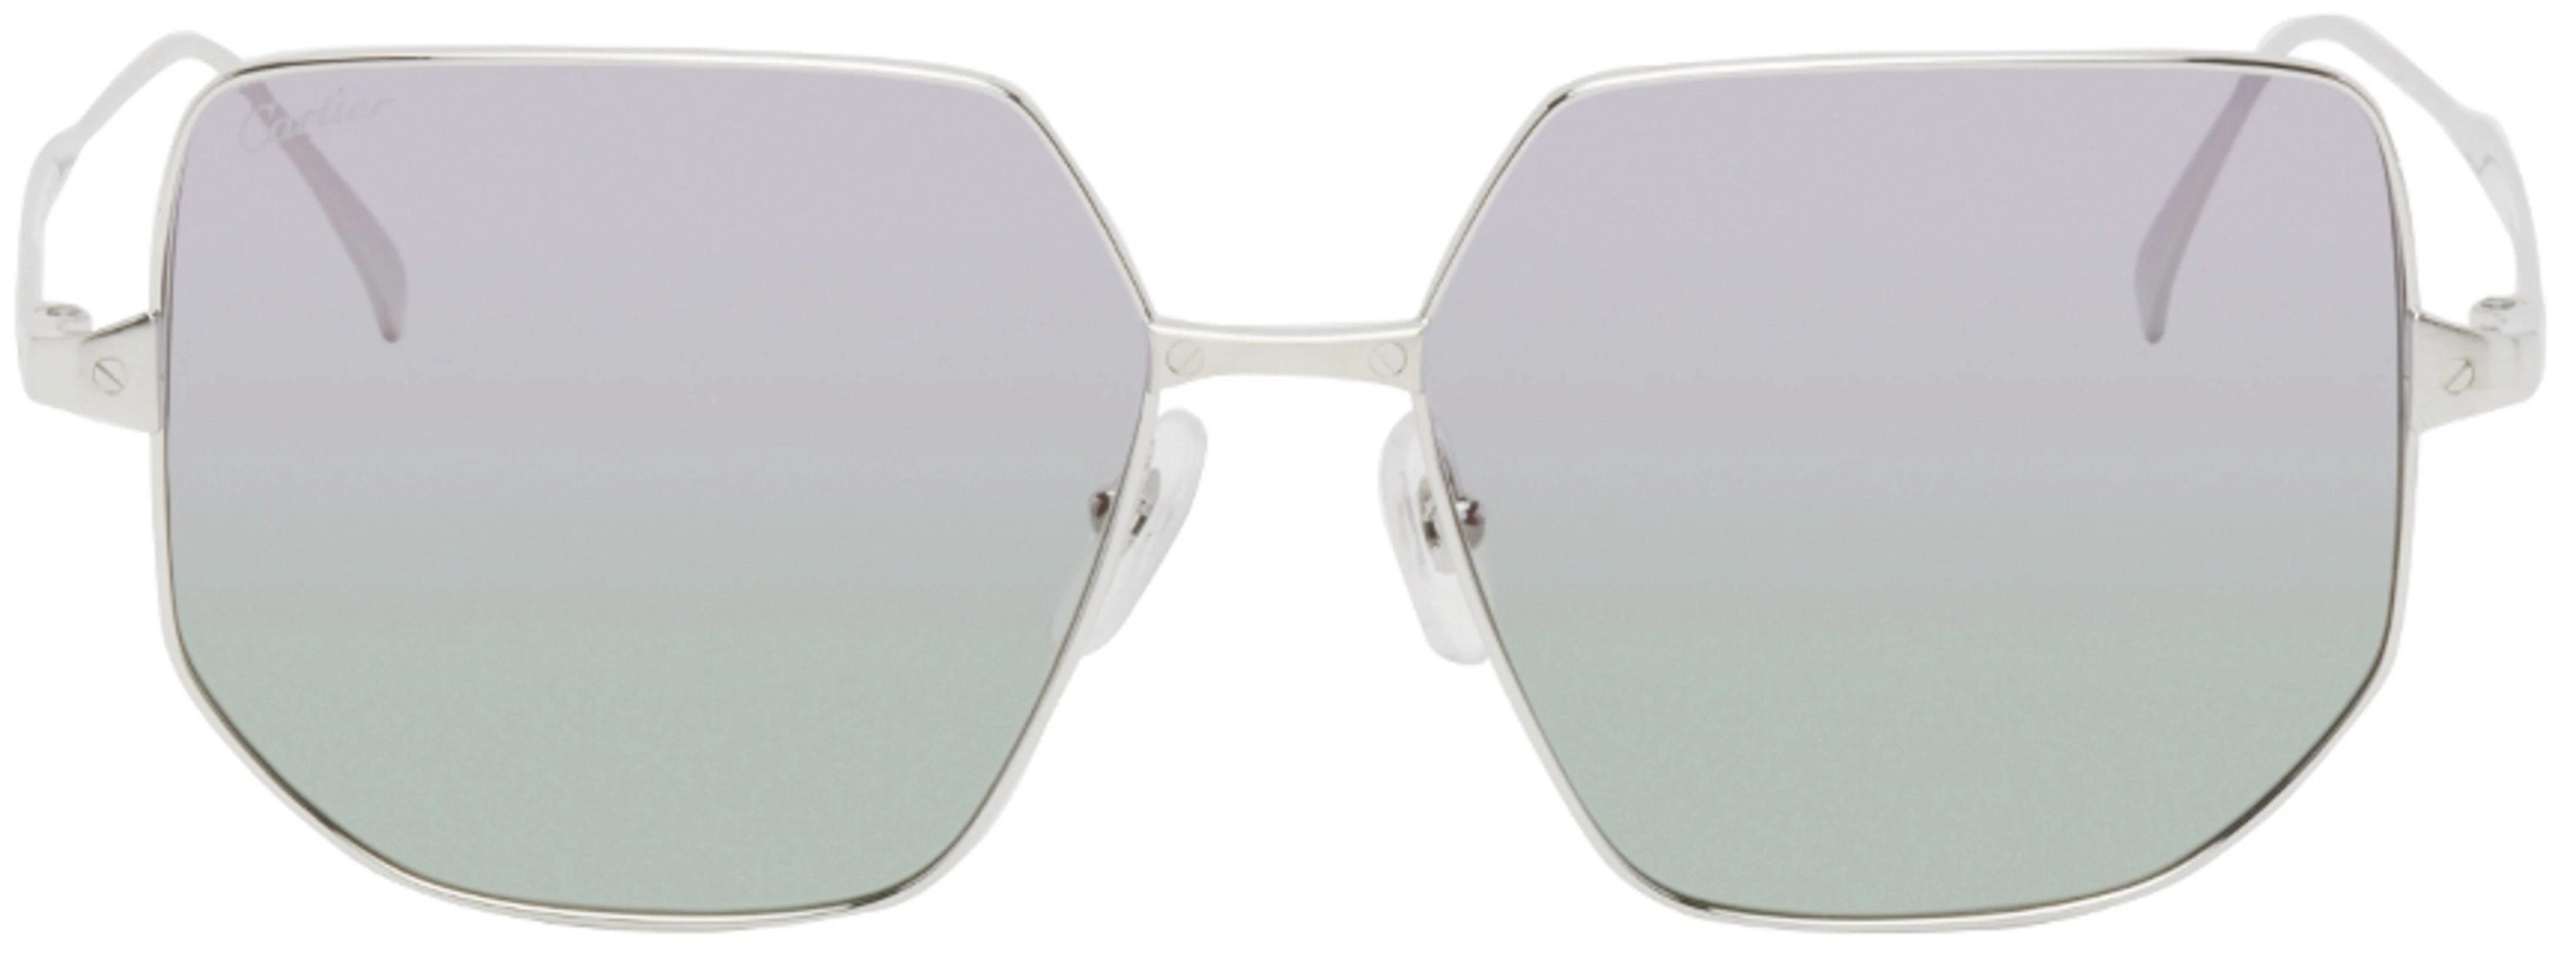 Silver Square Sunglasses by CARTIER